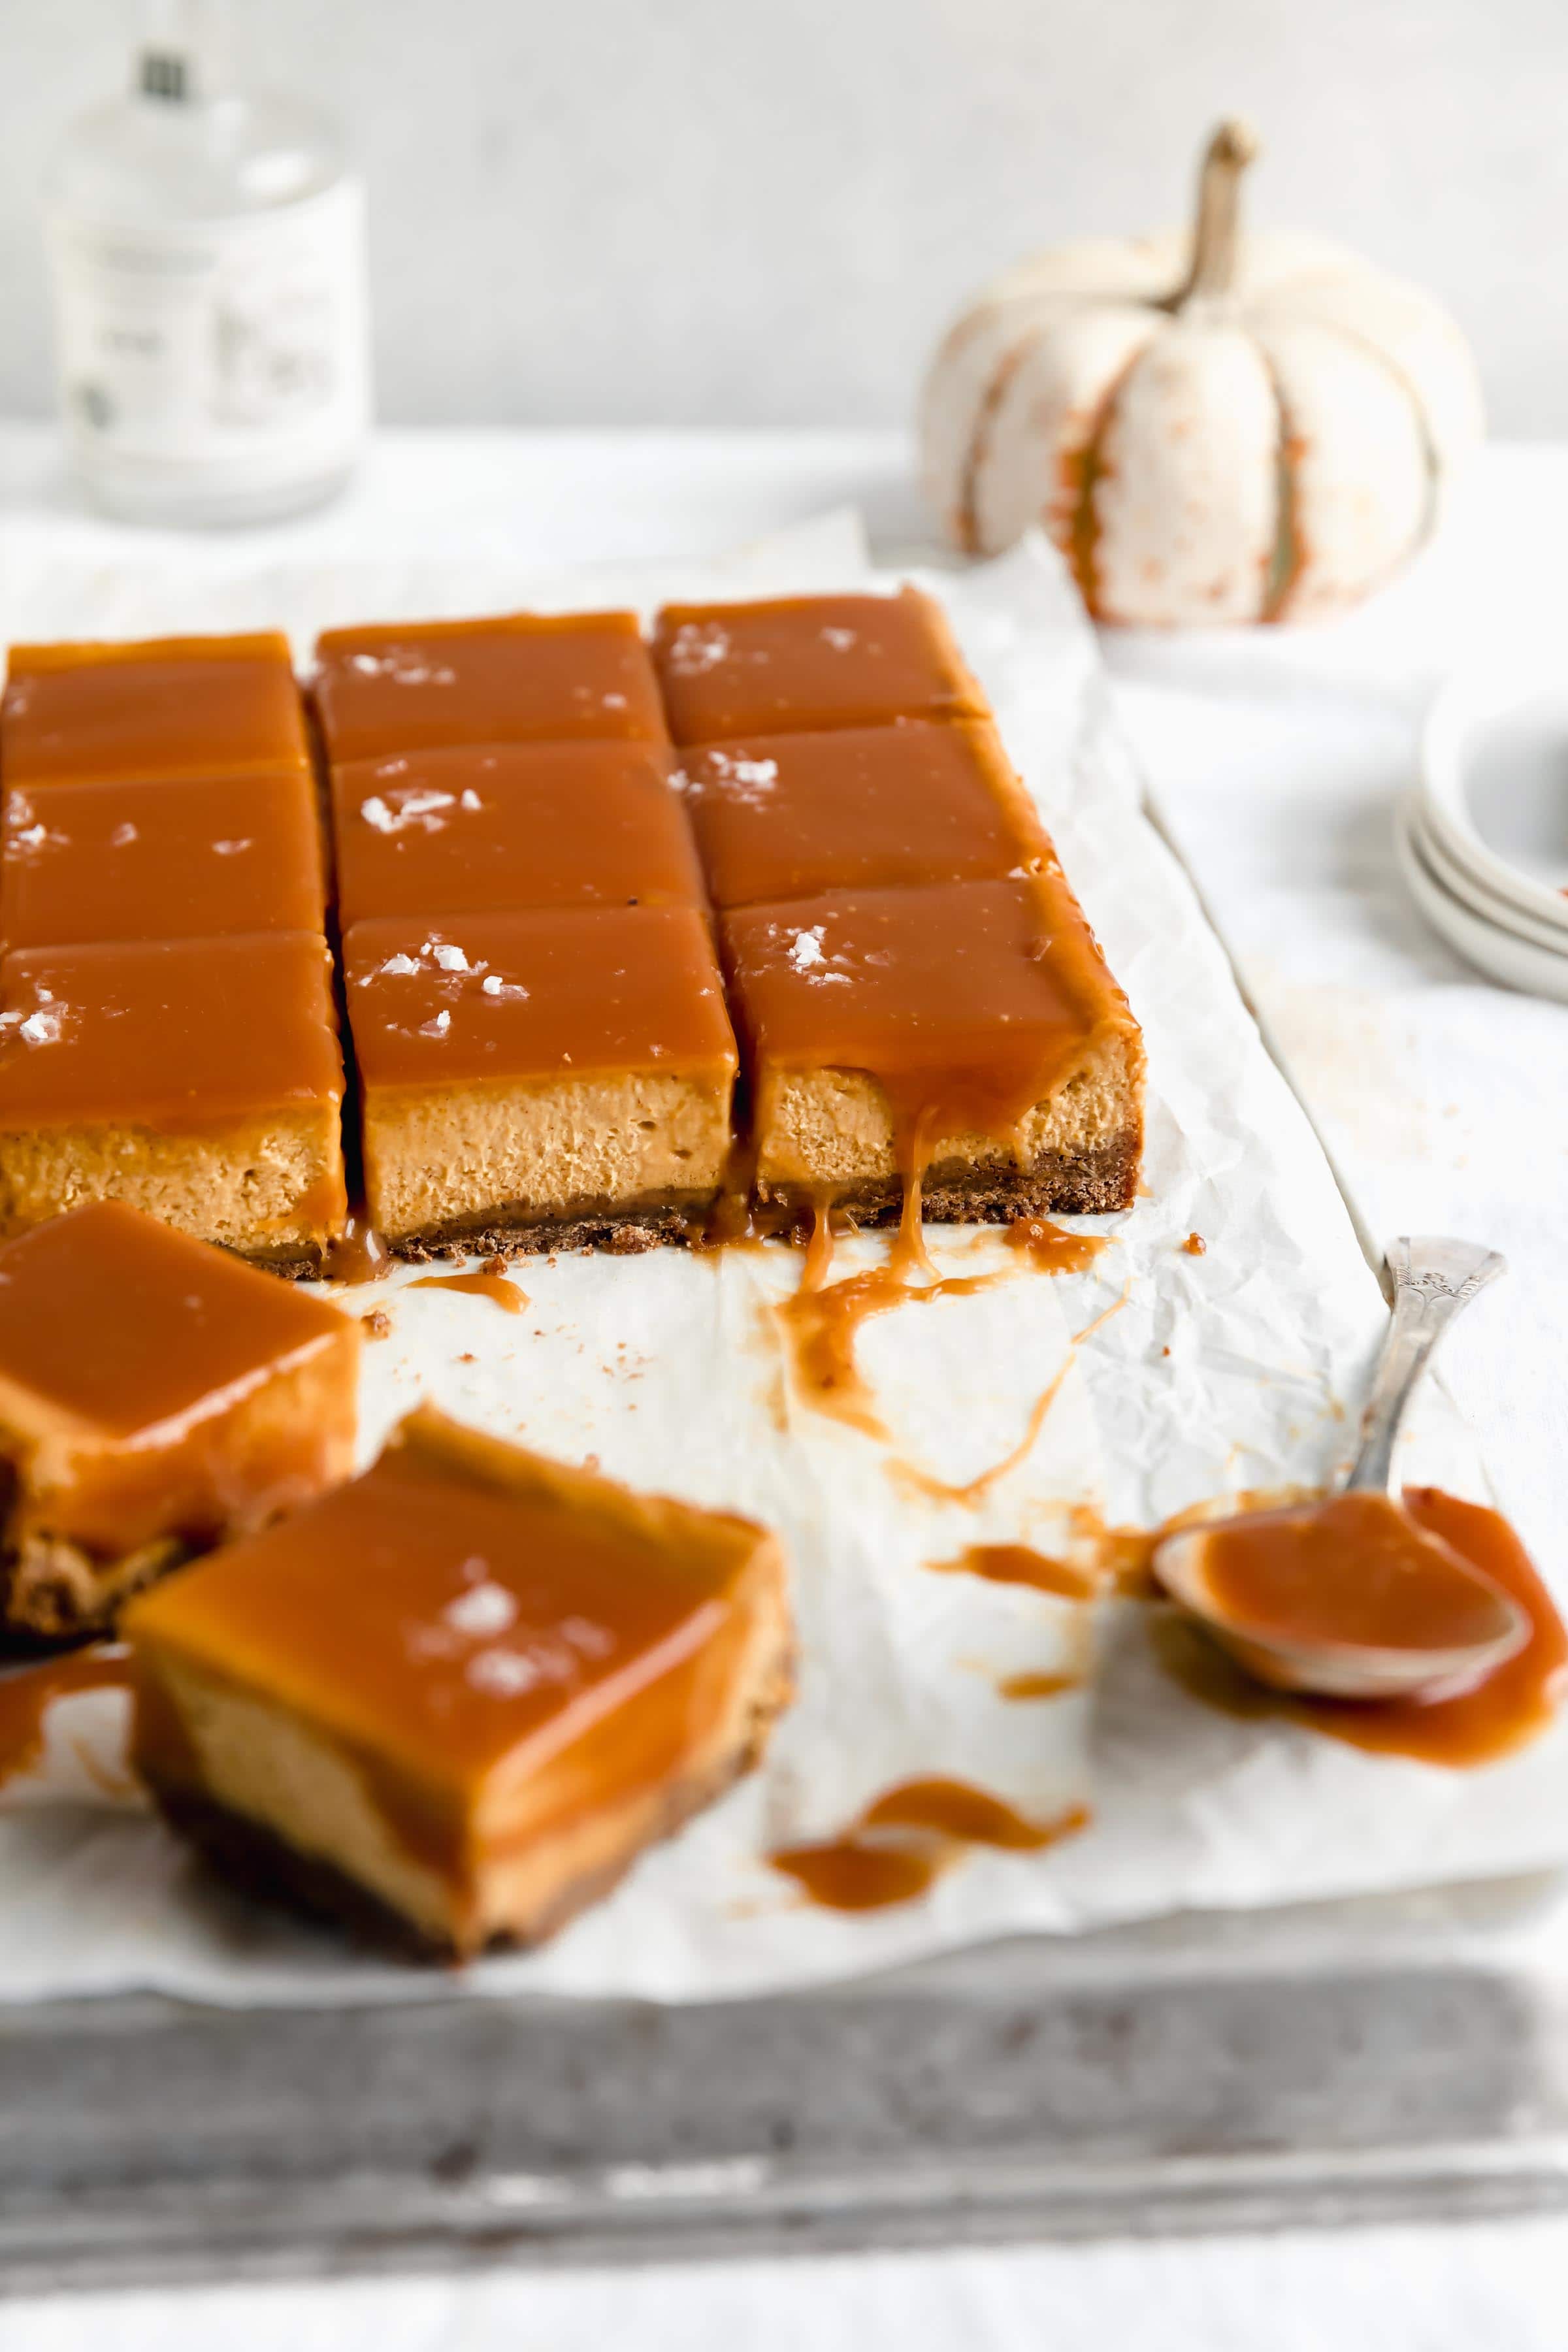 Starting a fan club for these salted caramel pumpkin cheesecake bars with a zingy gingersnap crust. Accepting applications to join me :)